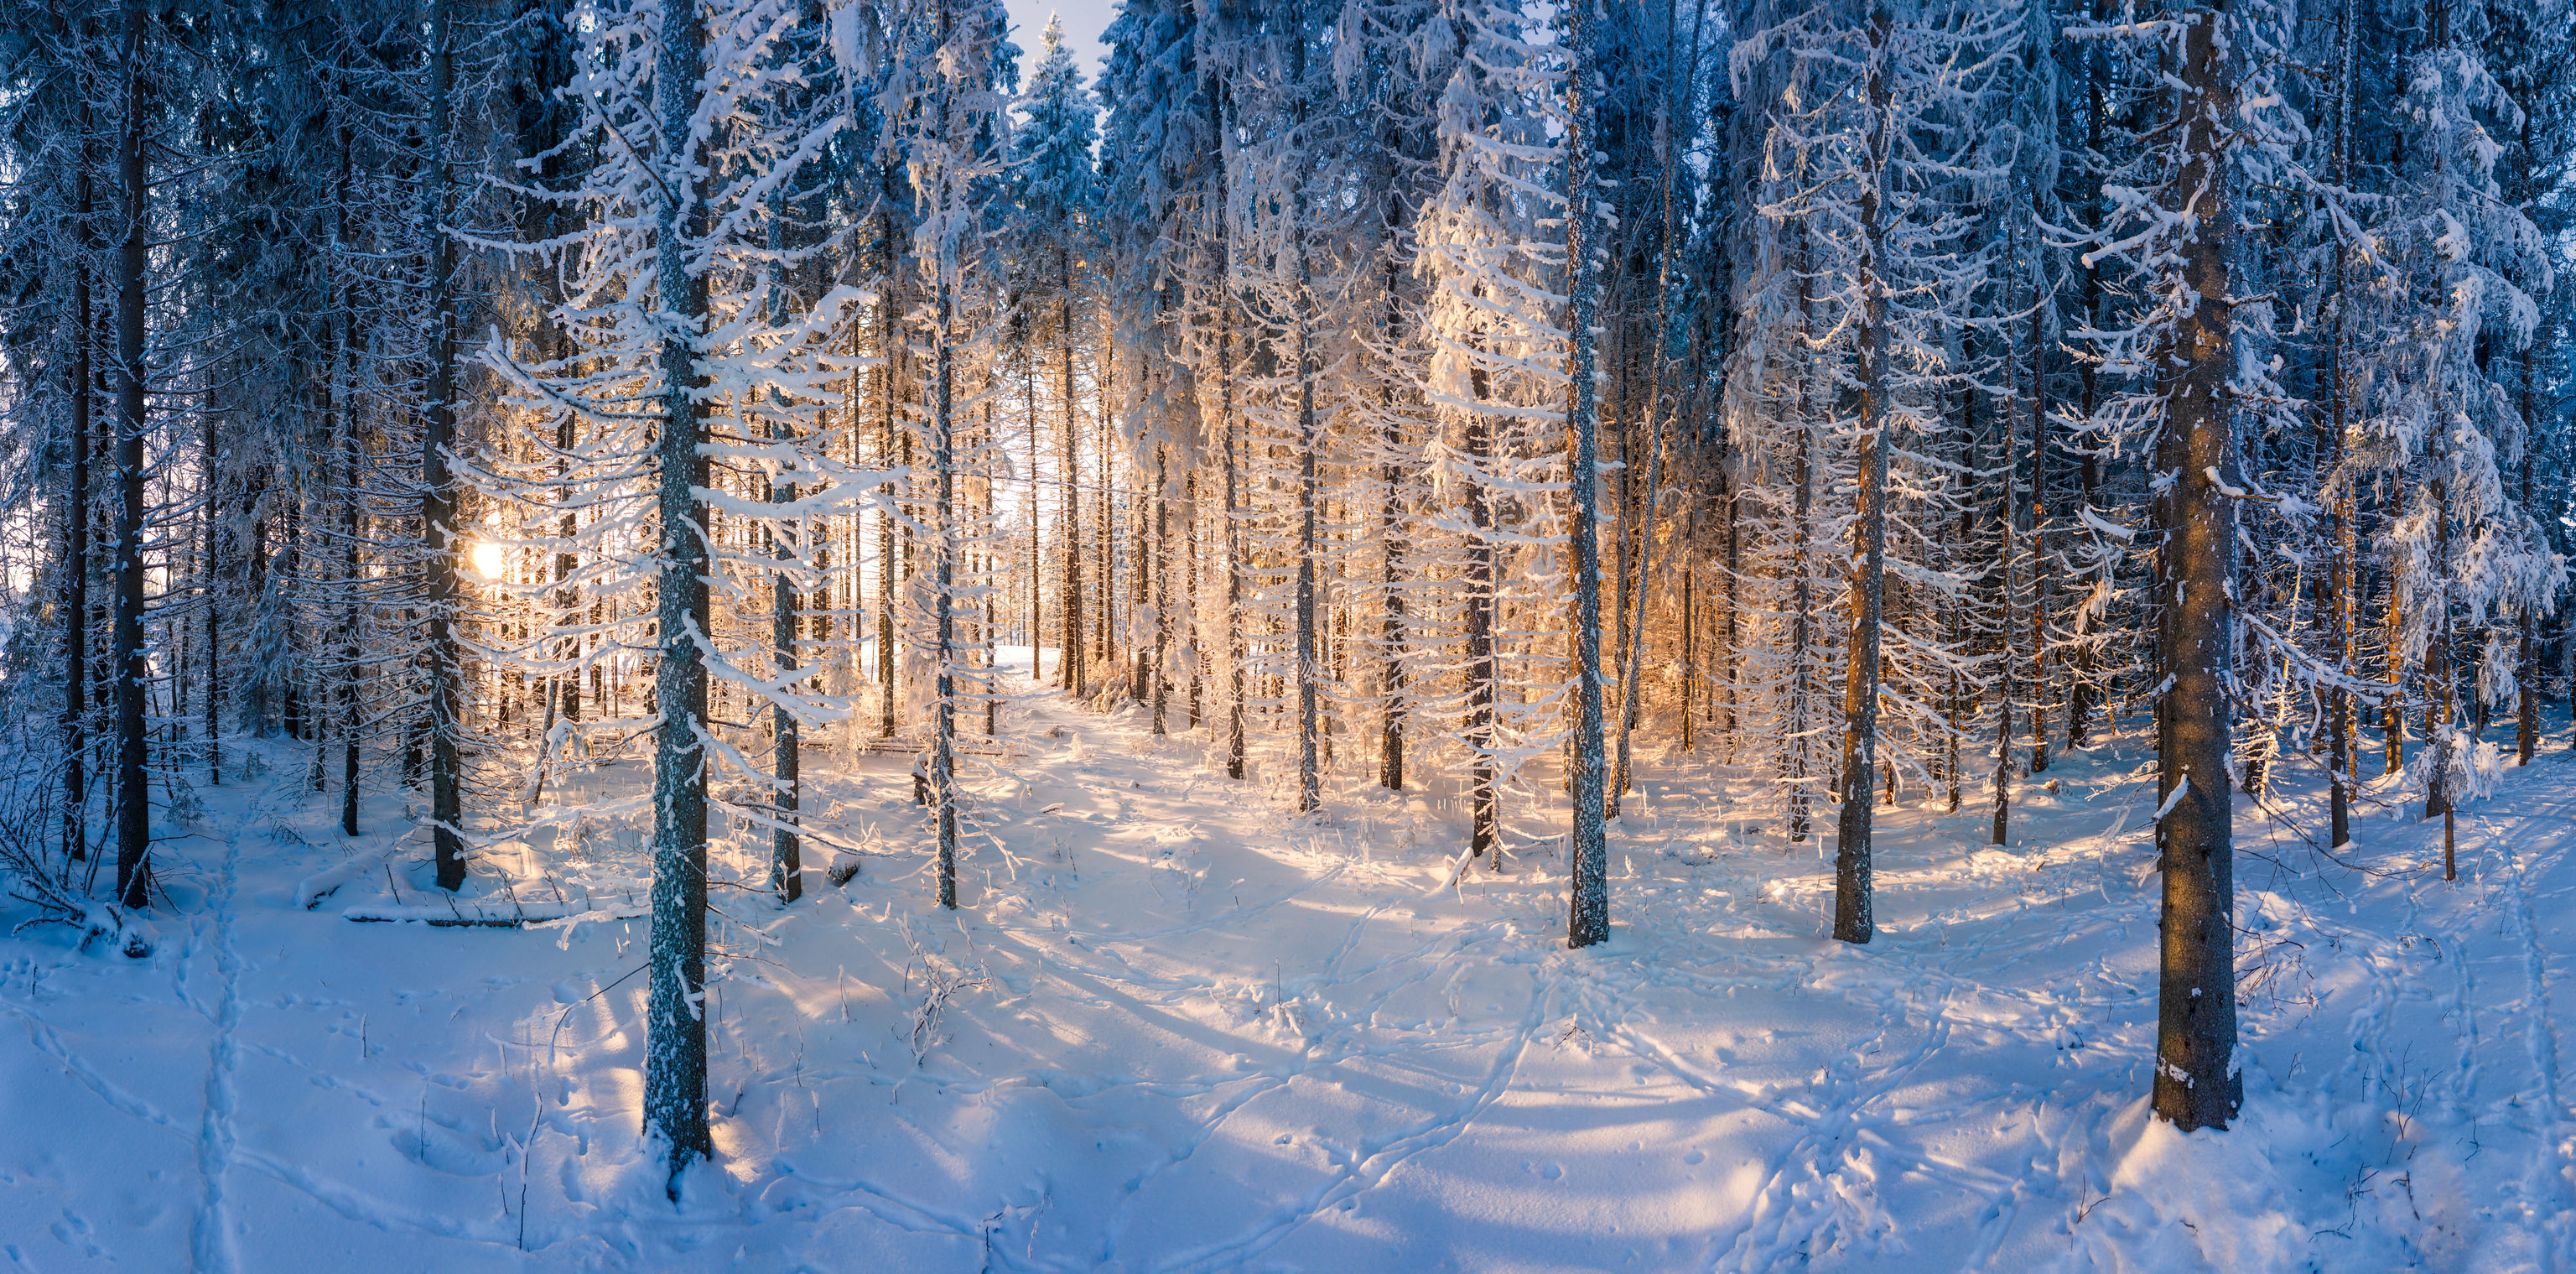 Nature Snow Forest Trees Winter Finland Sunrise Outdoors Cold Ice Plants Sunlight 3072x1519